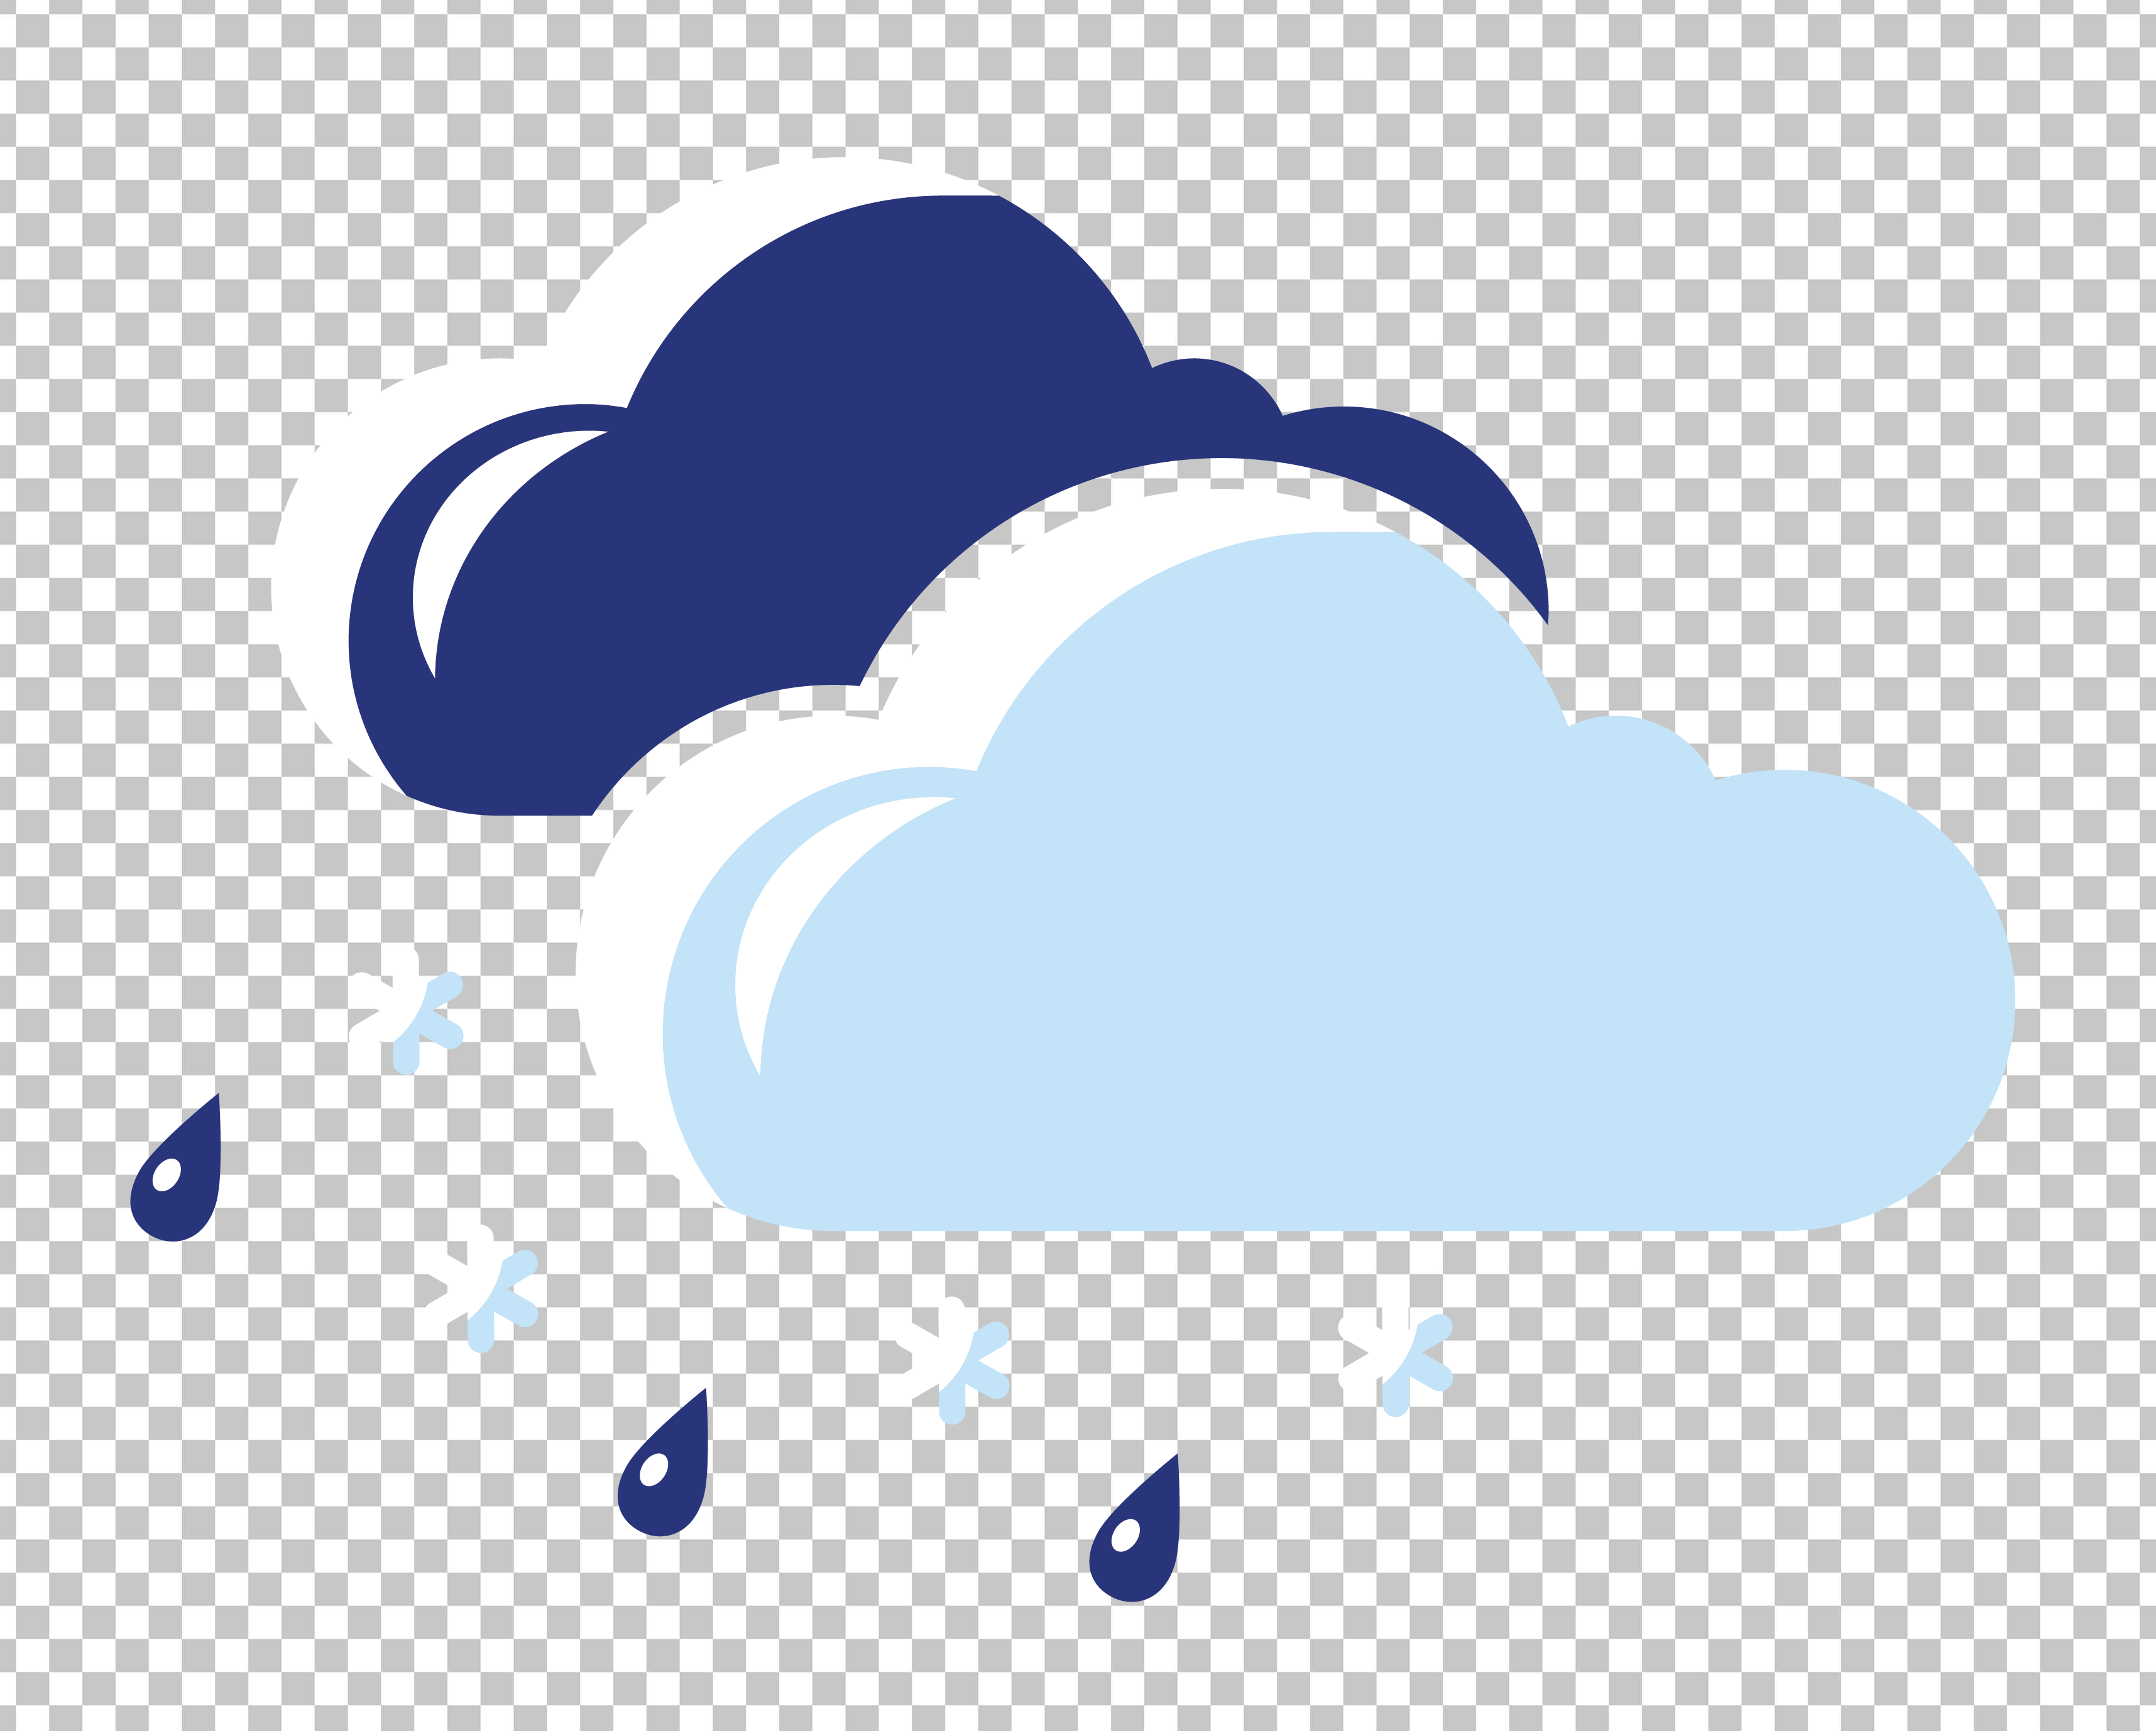 Rainy and Snowy Icon PNG Image